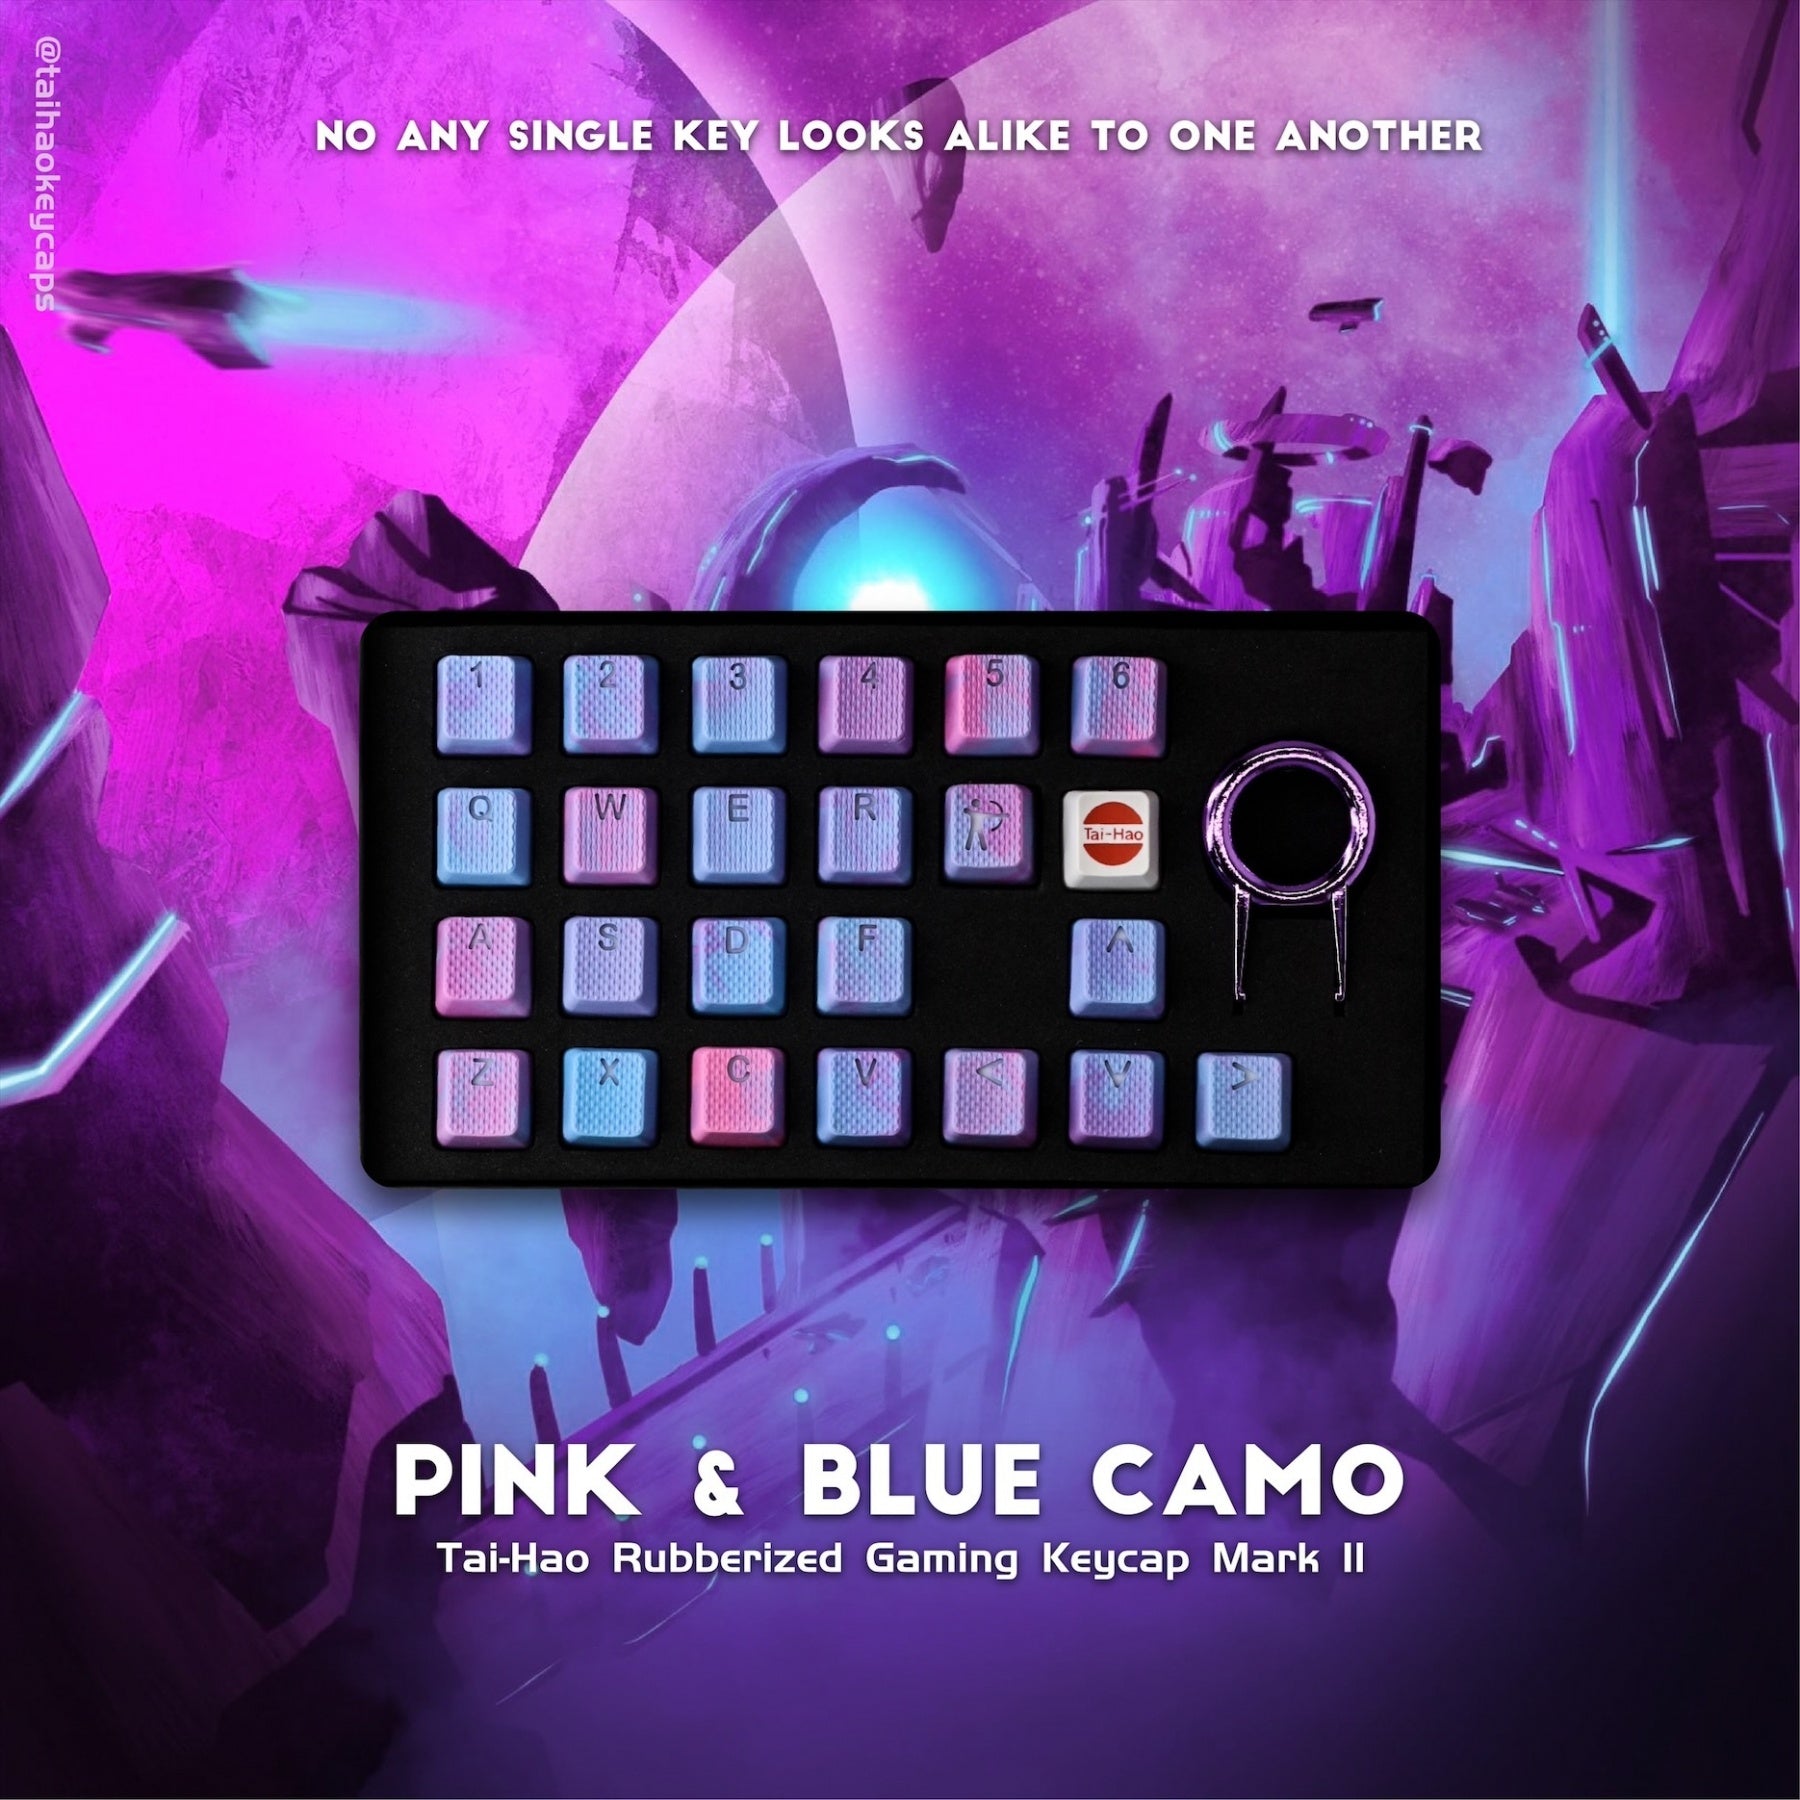 Tai-Hao 23-Key TPR Rubberized Gaming Keycap Set Pink & Blue Camo Rubber MKUXEB08TH |0|